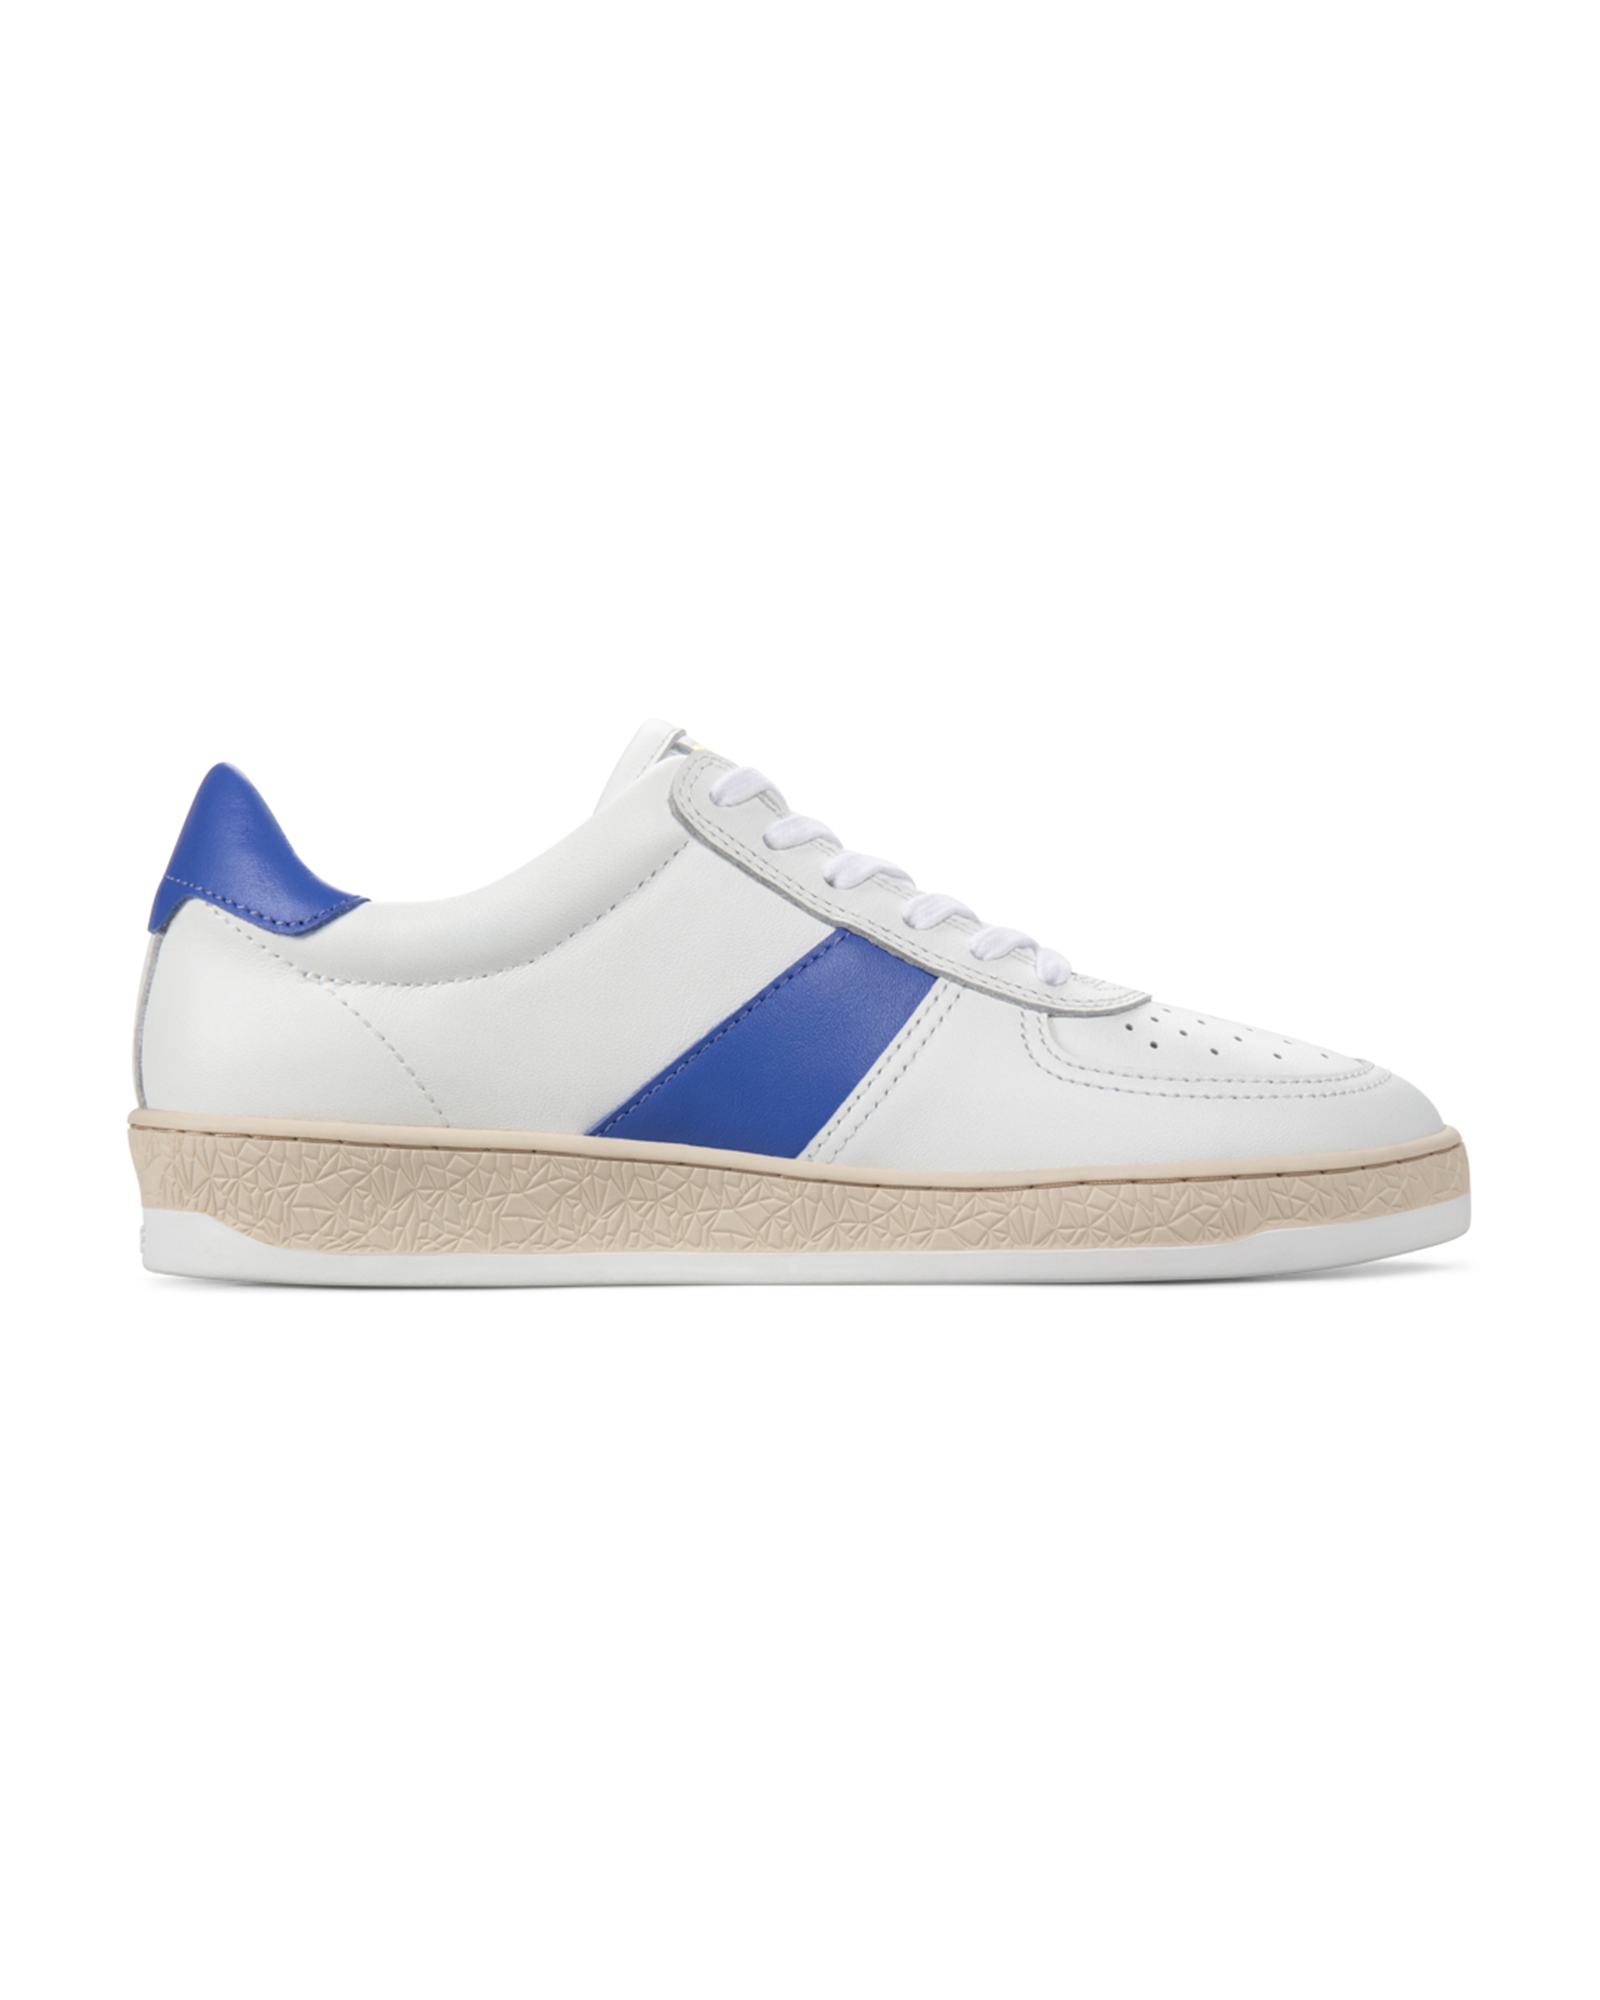 White/Blue/Leather